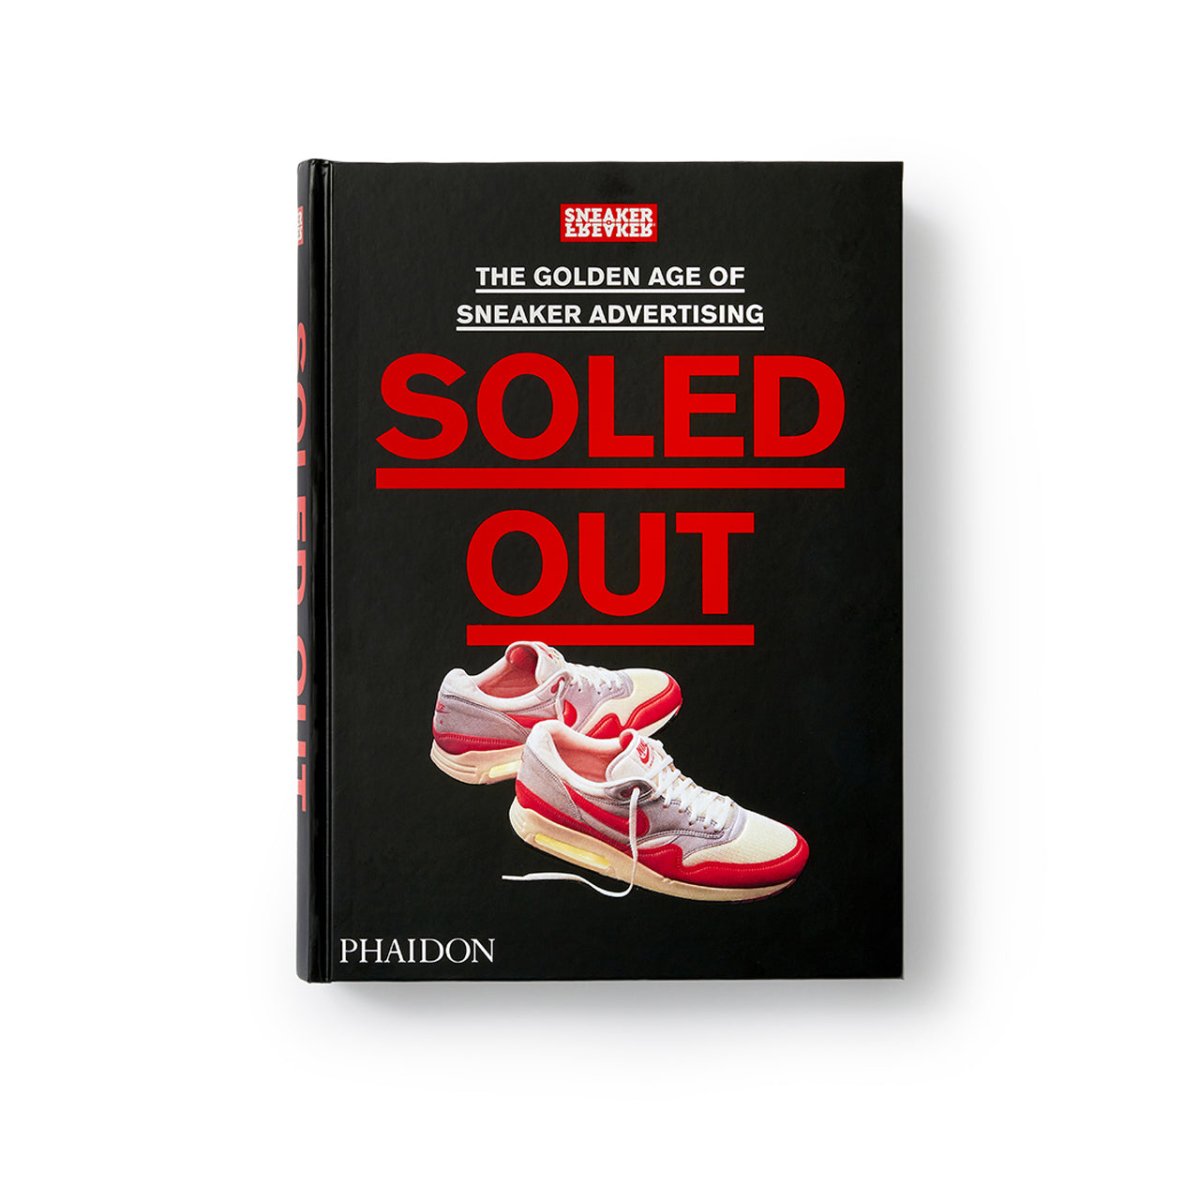 Image of Sneaker Freaker: Soled Out. The Golden Age of Sneaker Advertising